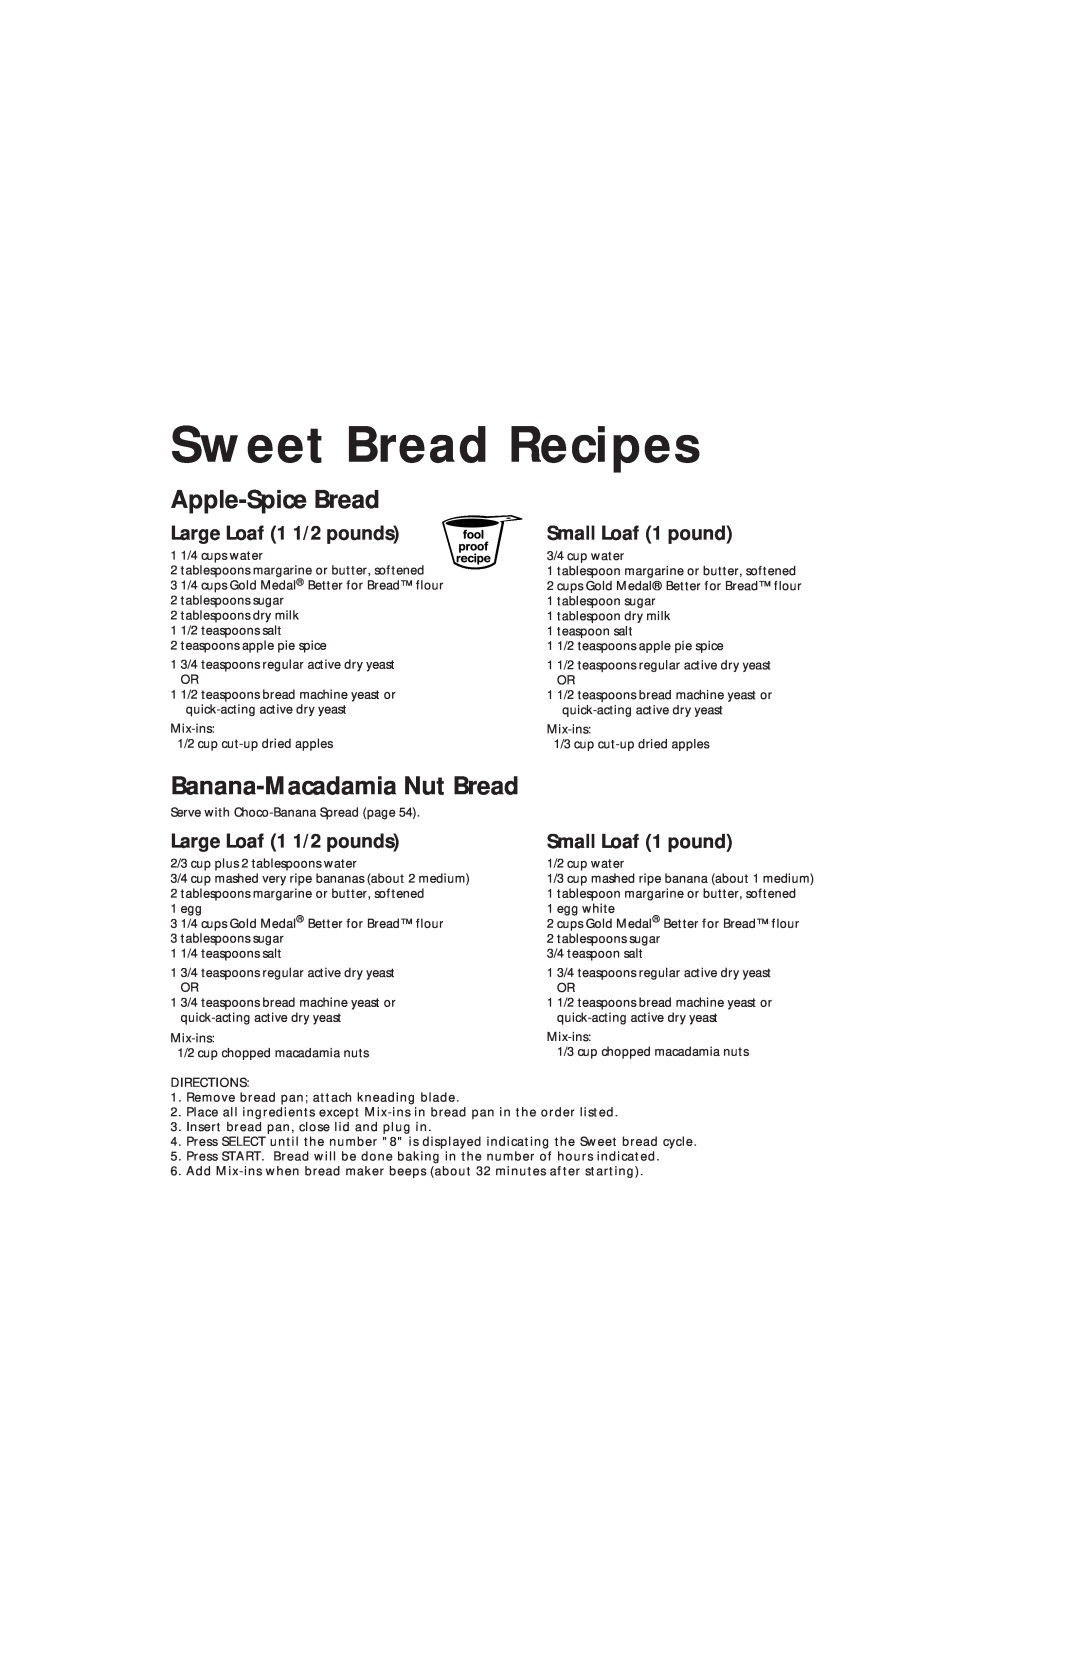 Oster Bread & Dough Maker manual Sweet Bread Recipes, Large Loaf 1 1/2 pounds, Small Loaf 1 pound 